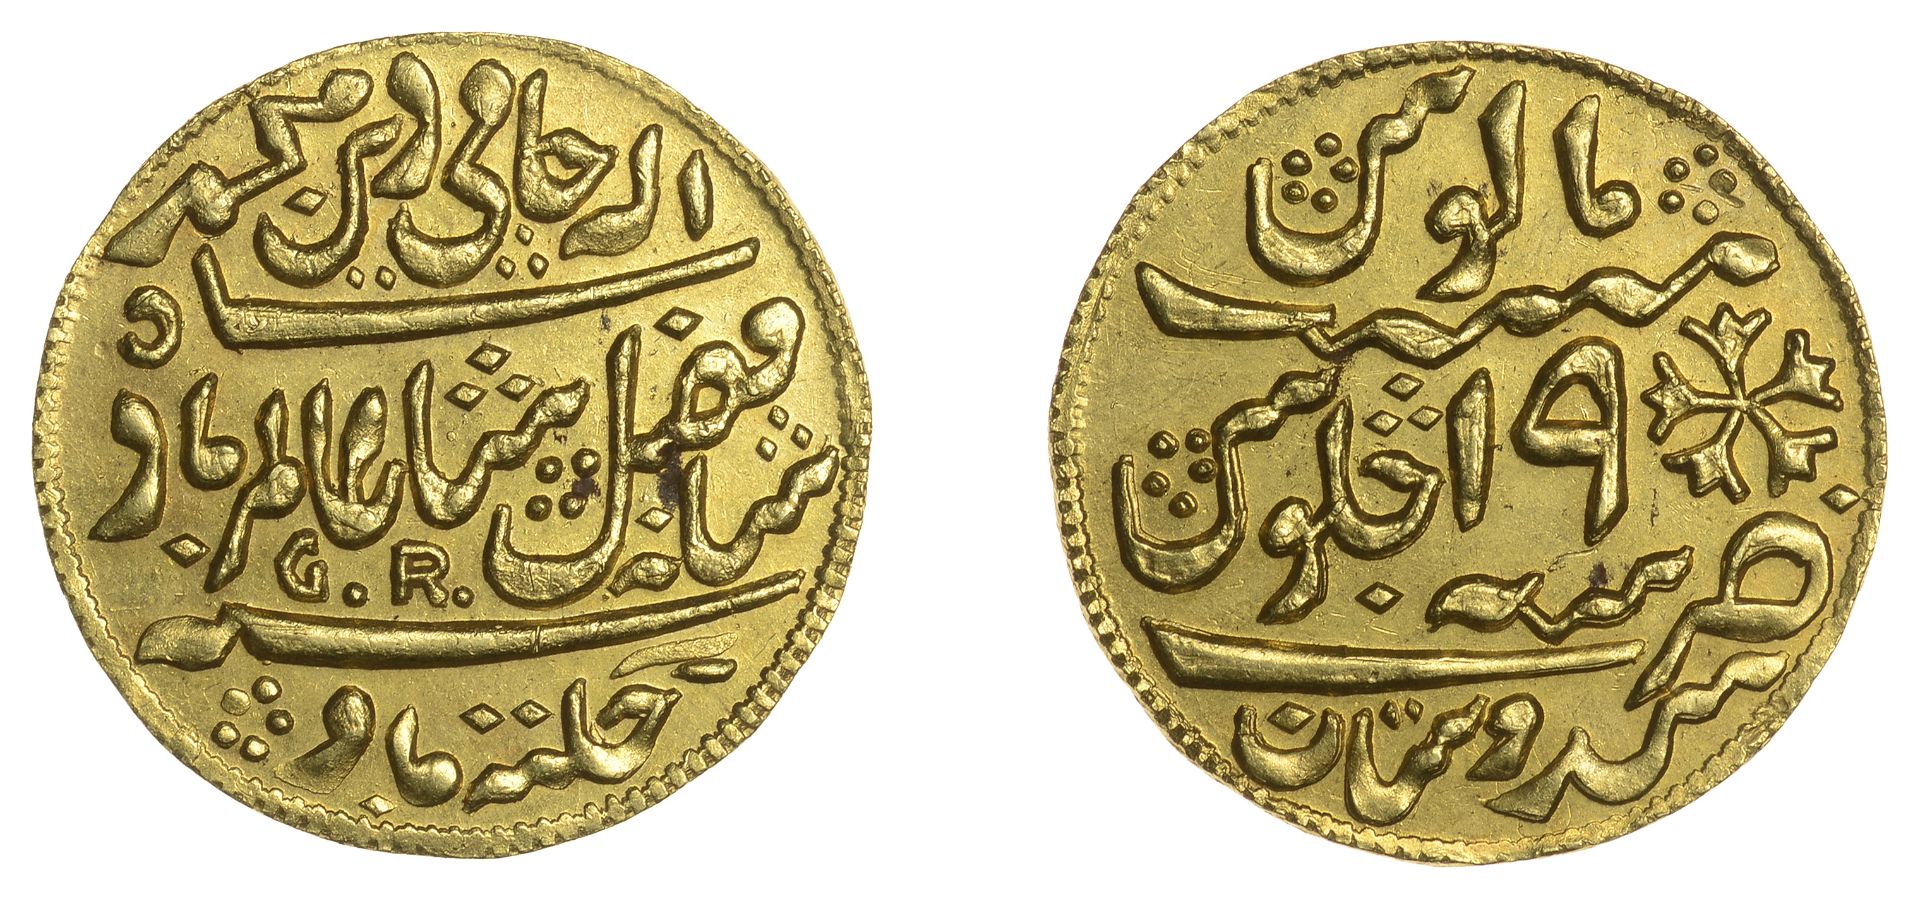 East India Company, Bengal Presidency, A jeweller's copy of a Murshidabad gold Half-Mohur, y...